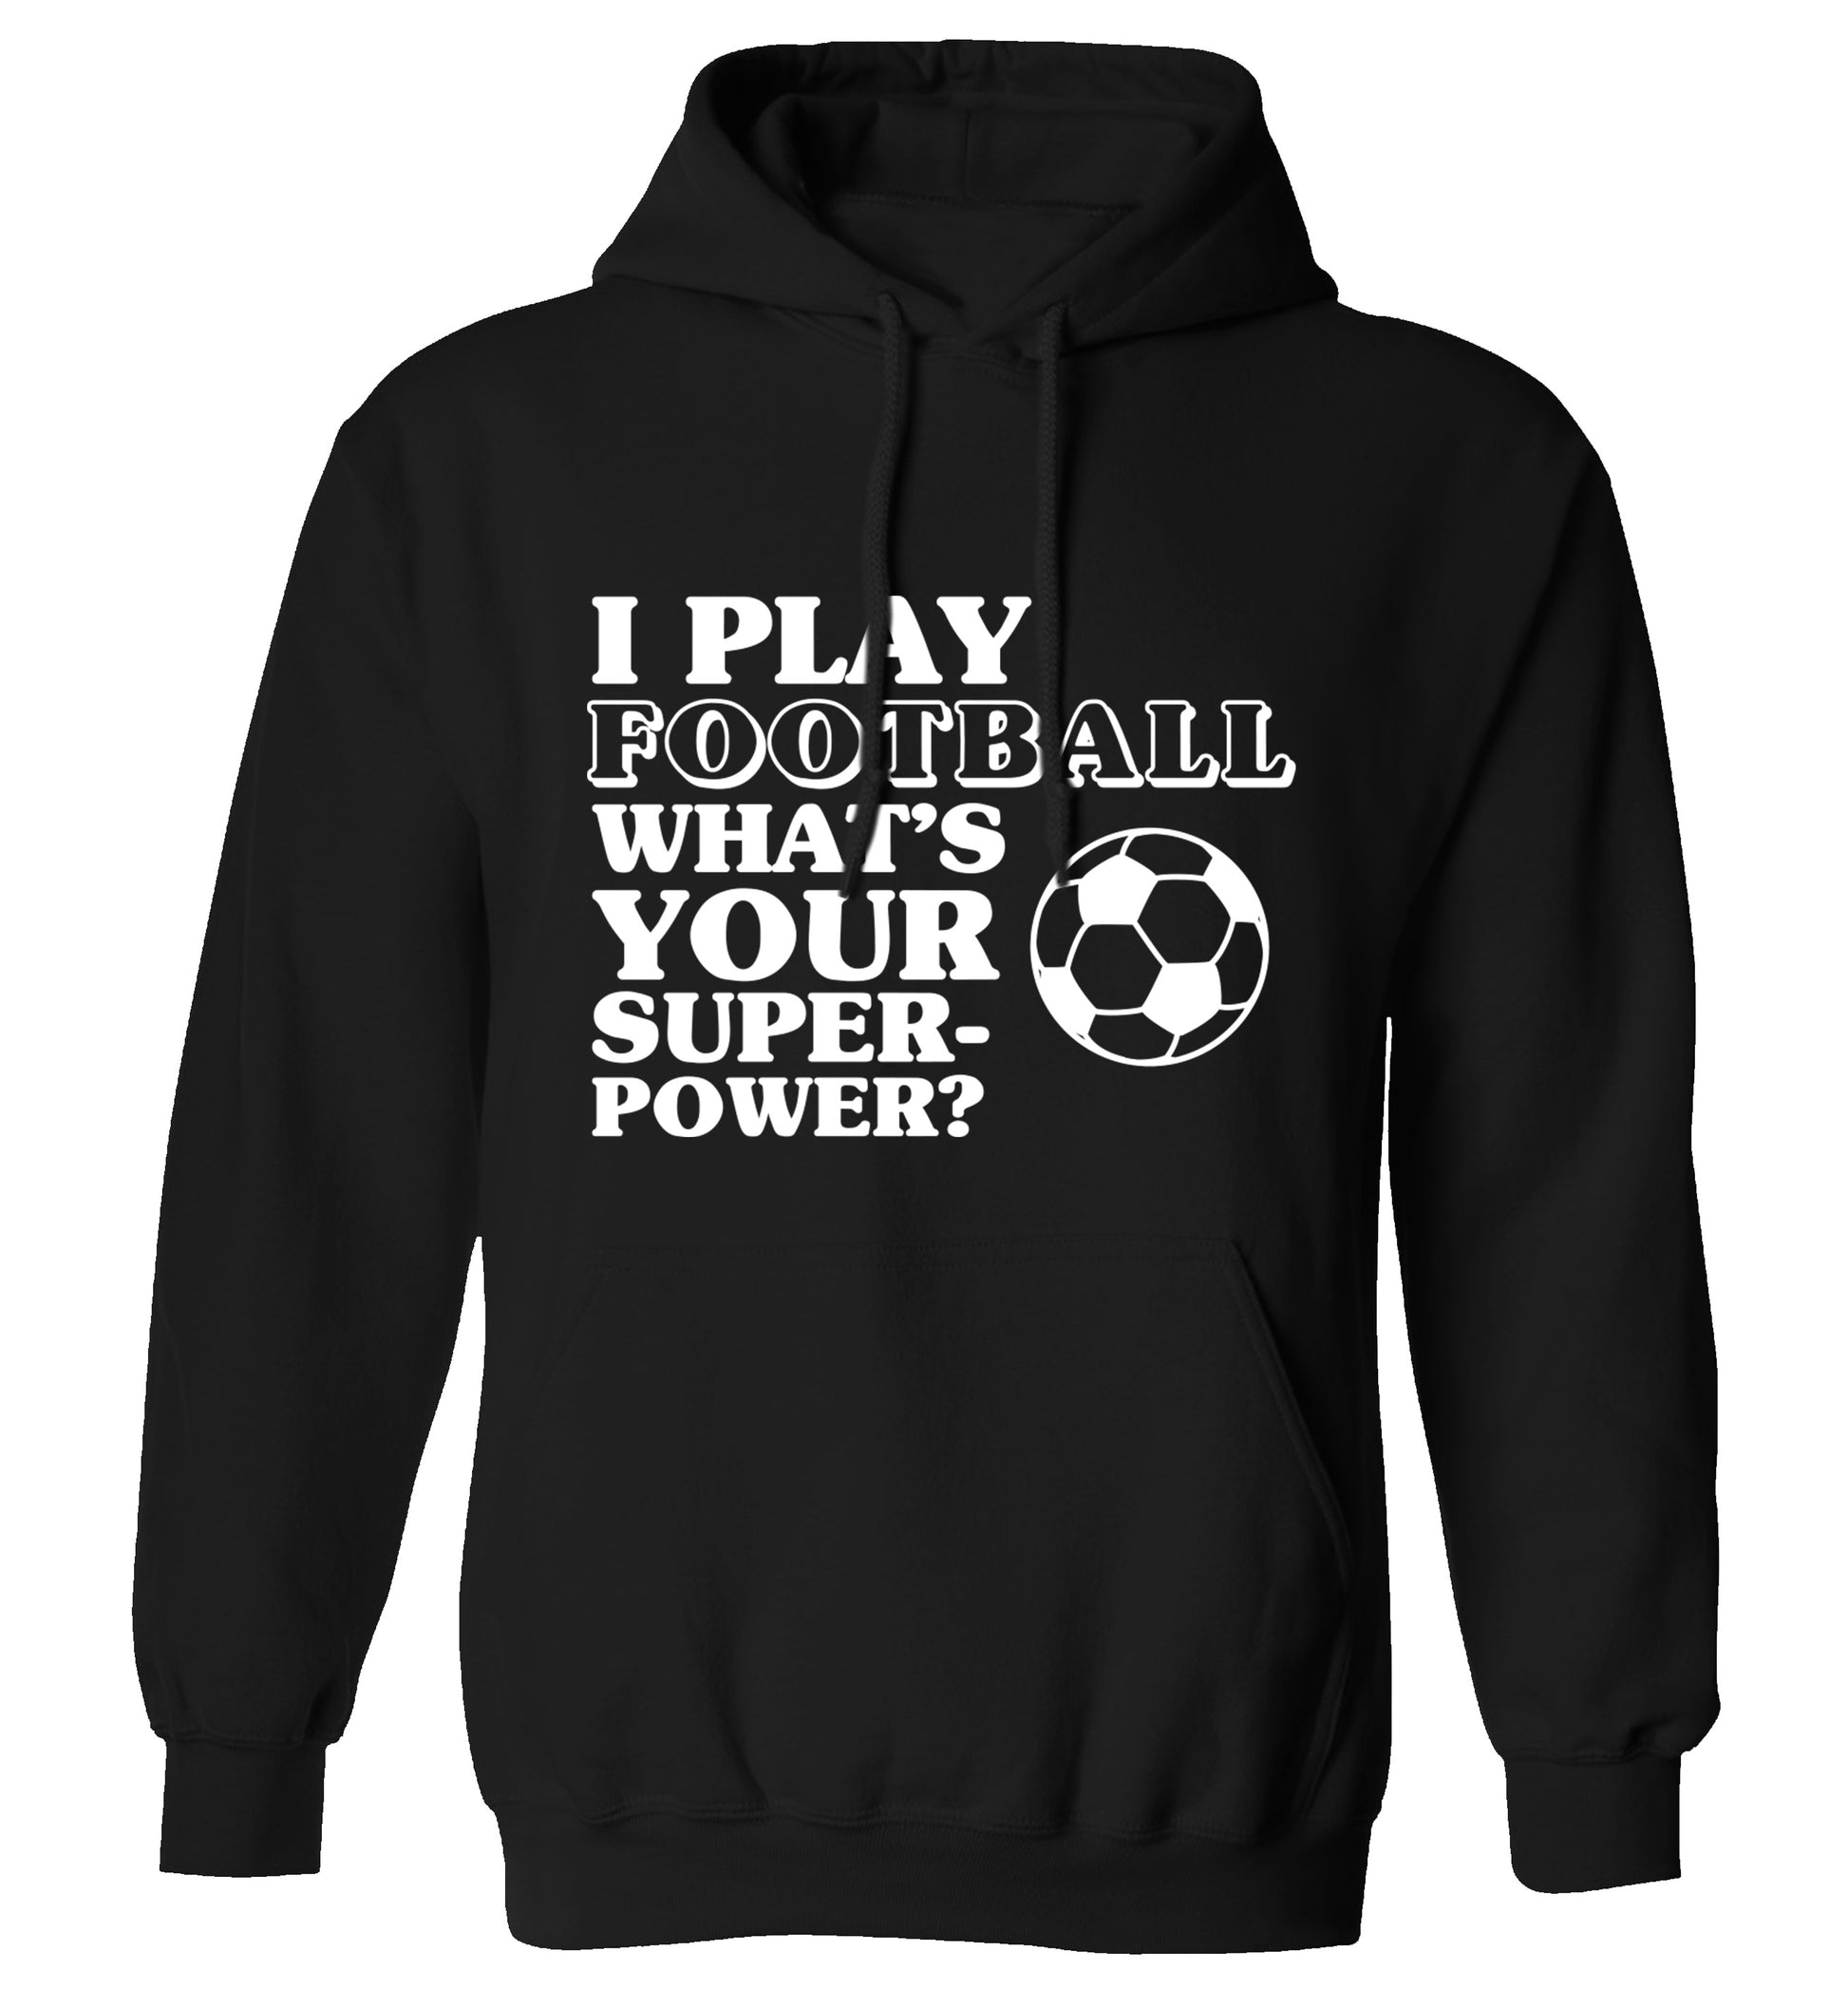 I play football what's your superpower? adults unisexblack hoodie 2XL